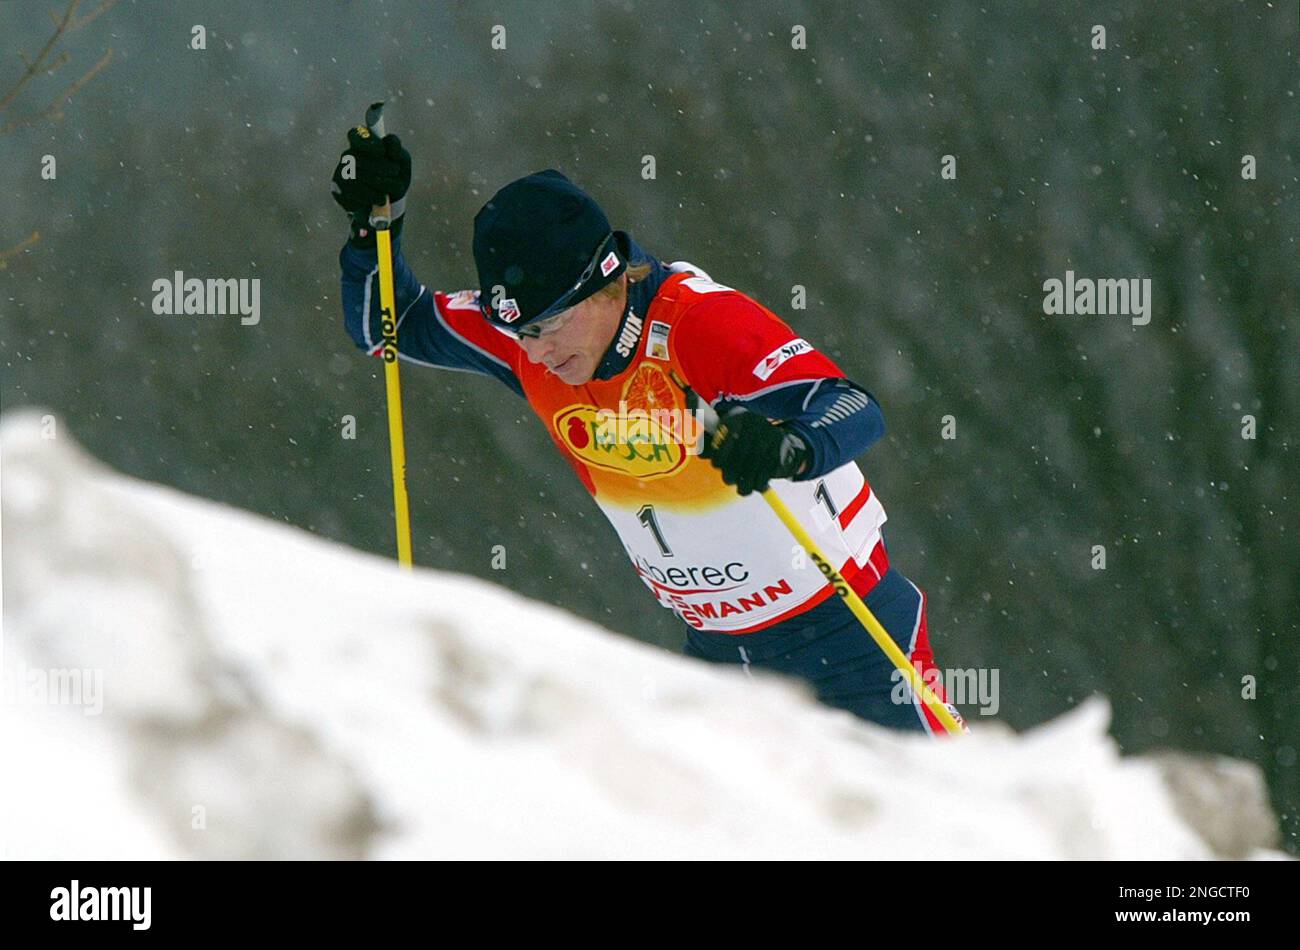 Todd Lodwick, of the U.S., climbs a hill during the Nordic Combined World  Cup event in Liberec, Czech Republic, on Sunday, Jan. 23, 2005. Lodwick  placed third behind Kristian Hammer from Norway